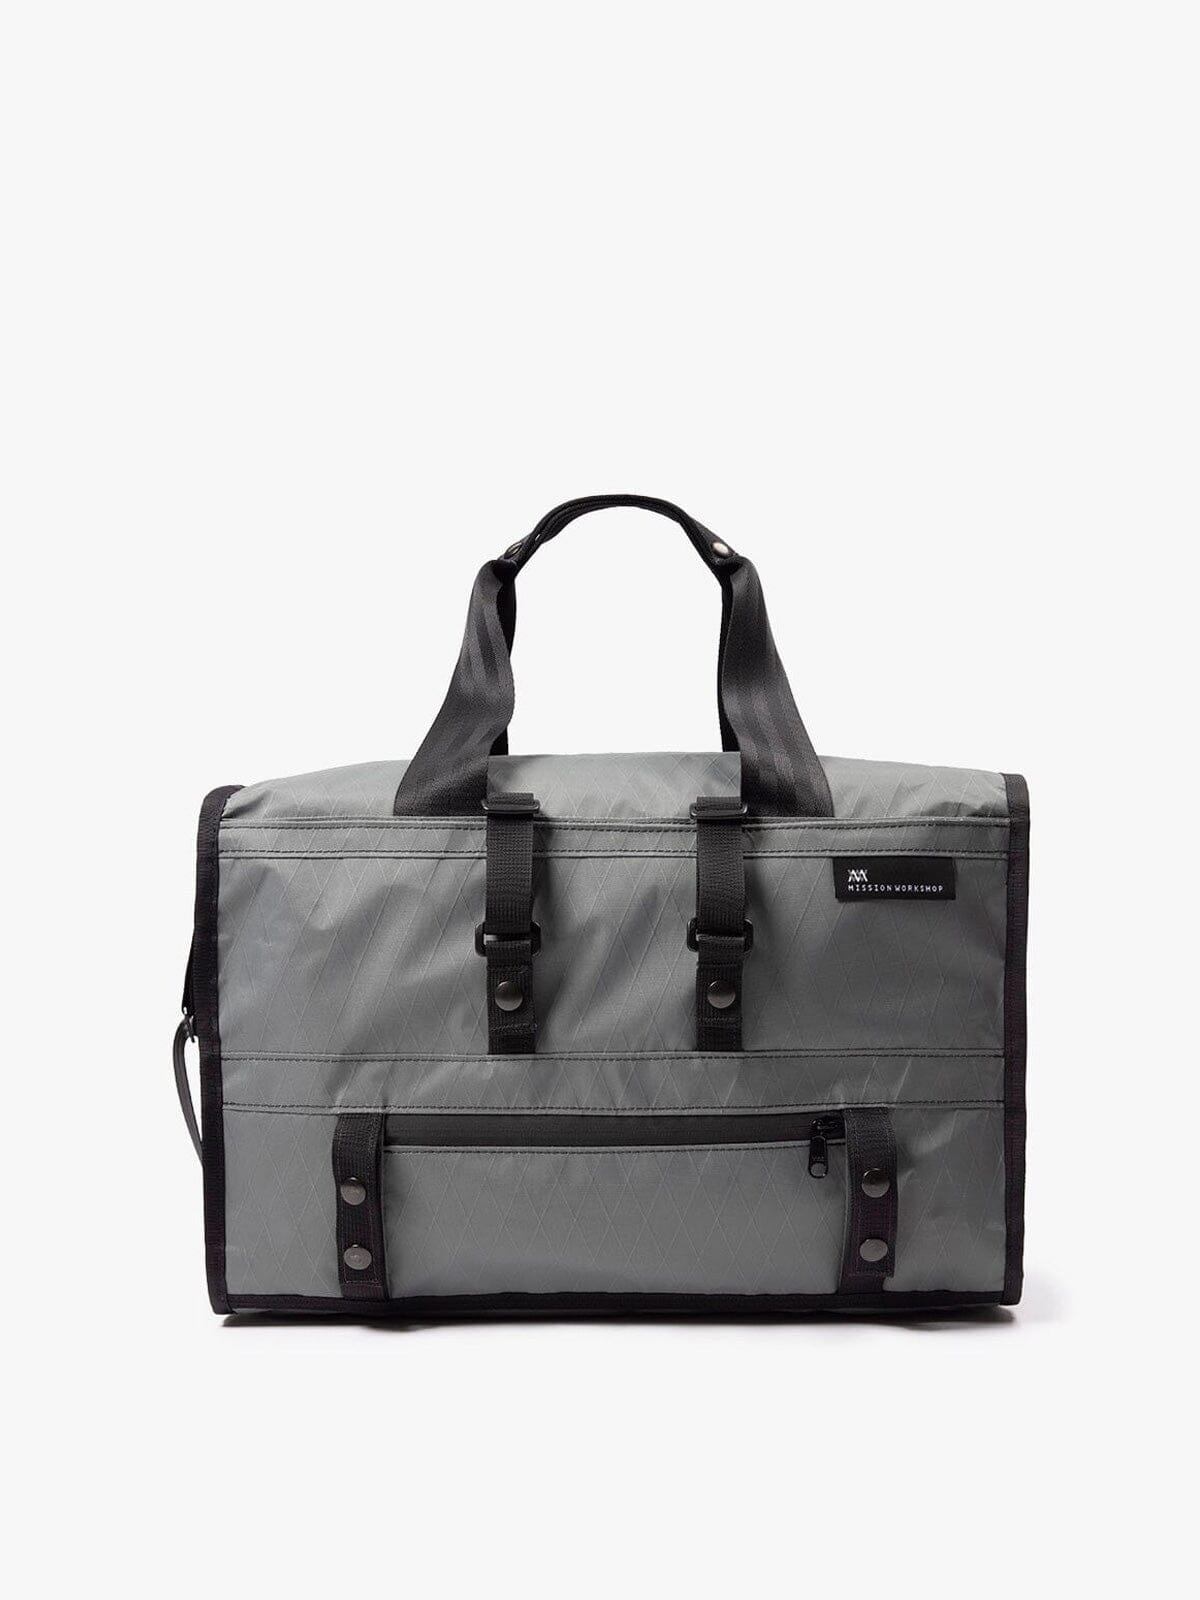 Transit : Duffle by Mission Workshop - Weatherproof Bags & Technical Apparel - San Francisco & Los Angeles - Built to endure - Guaranteed forever